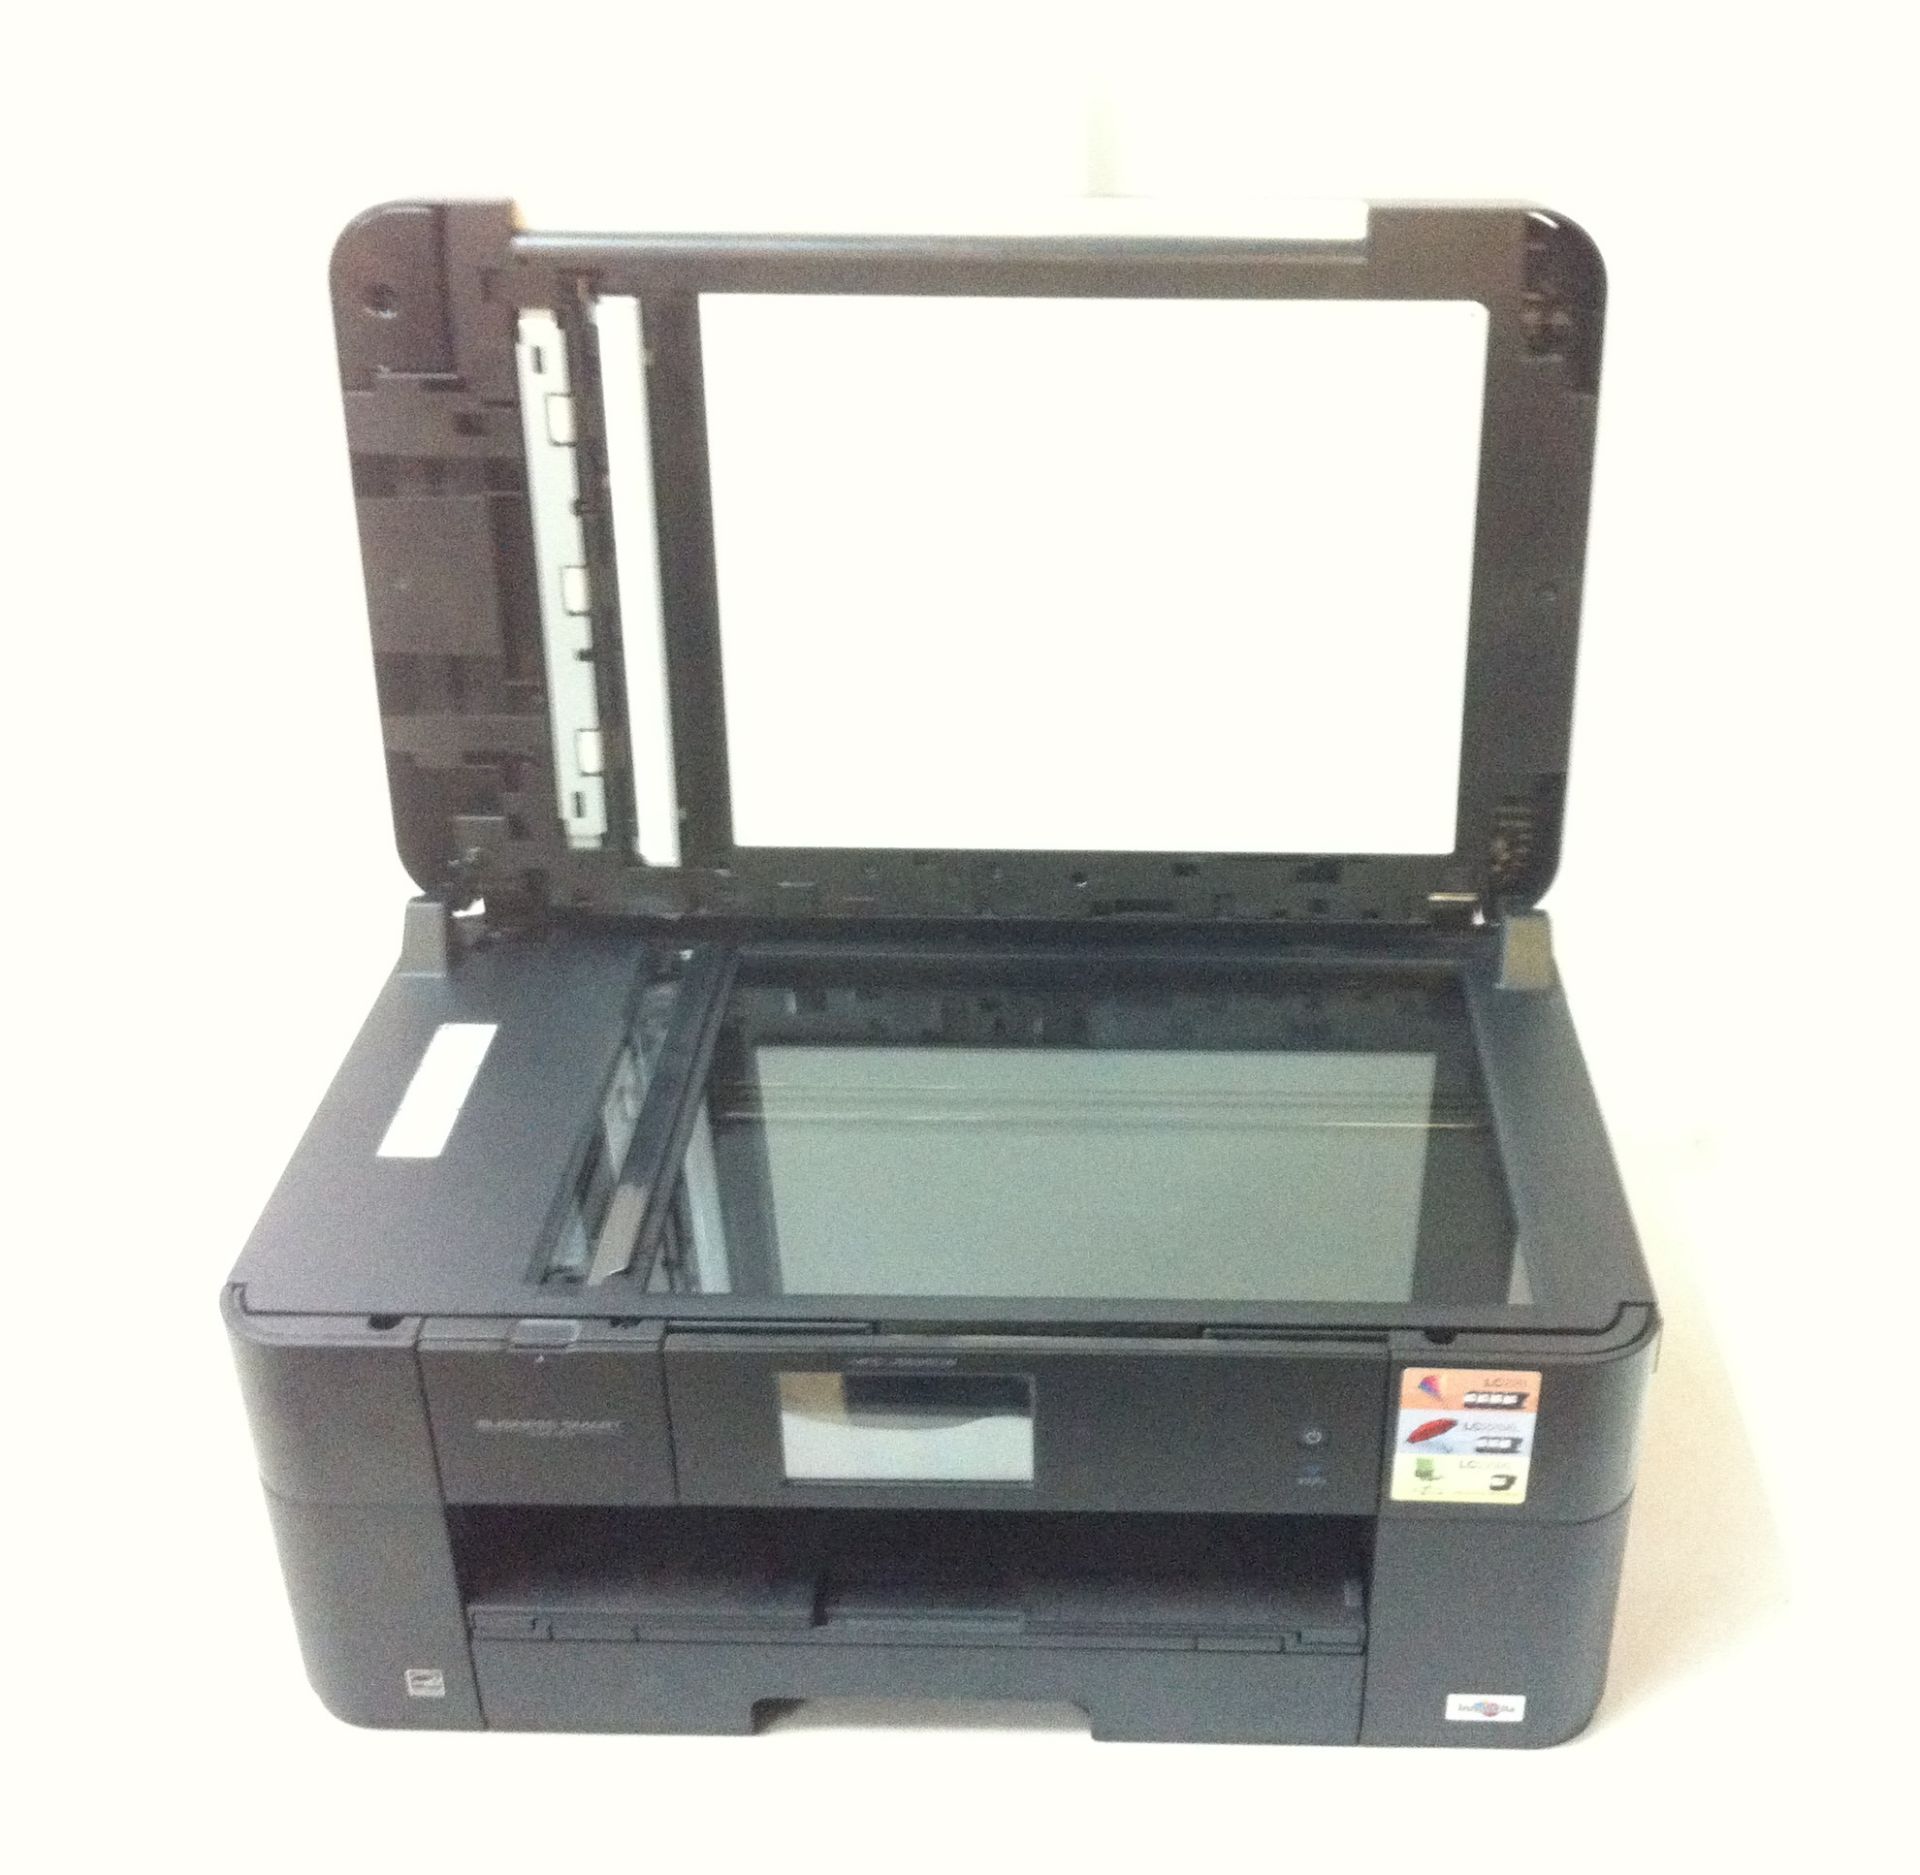 Brother MFC All-in One Printer - Image 2 of 3